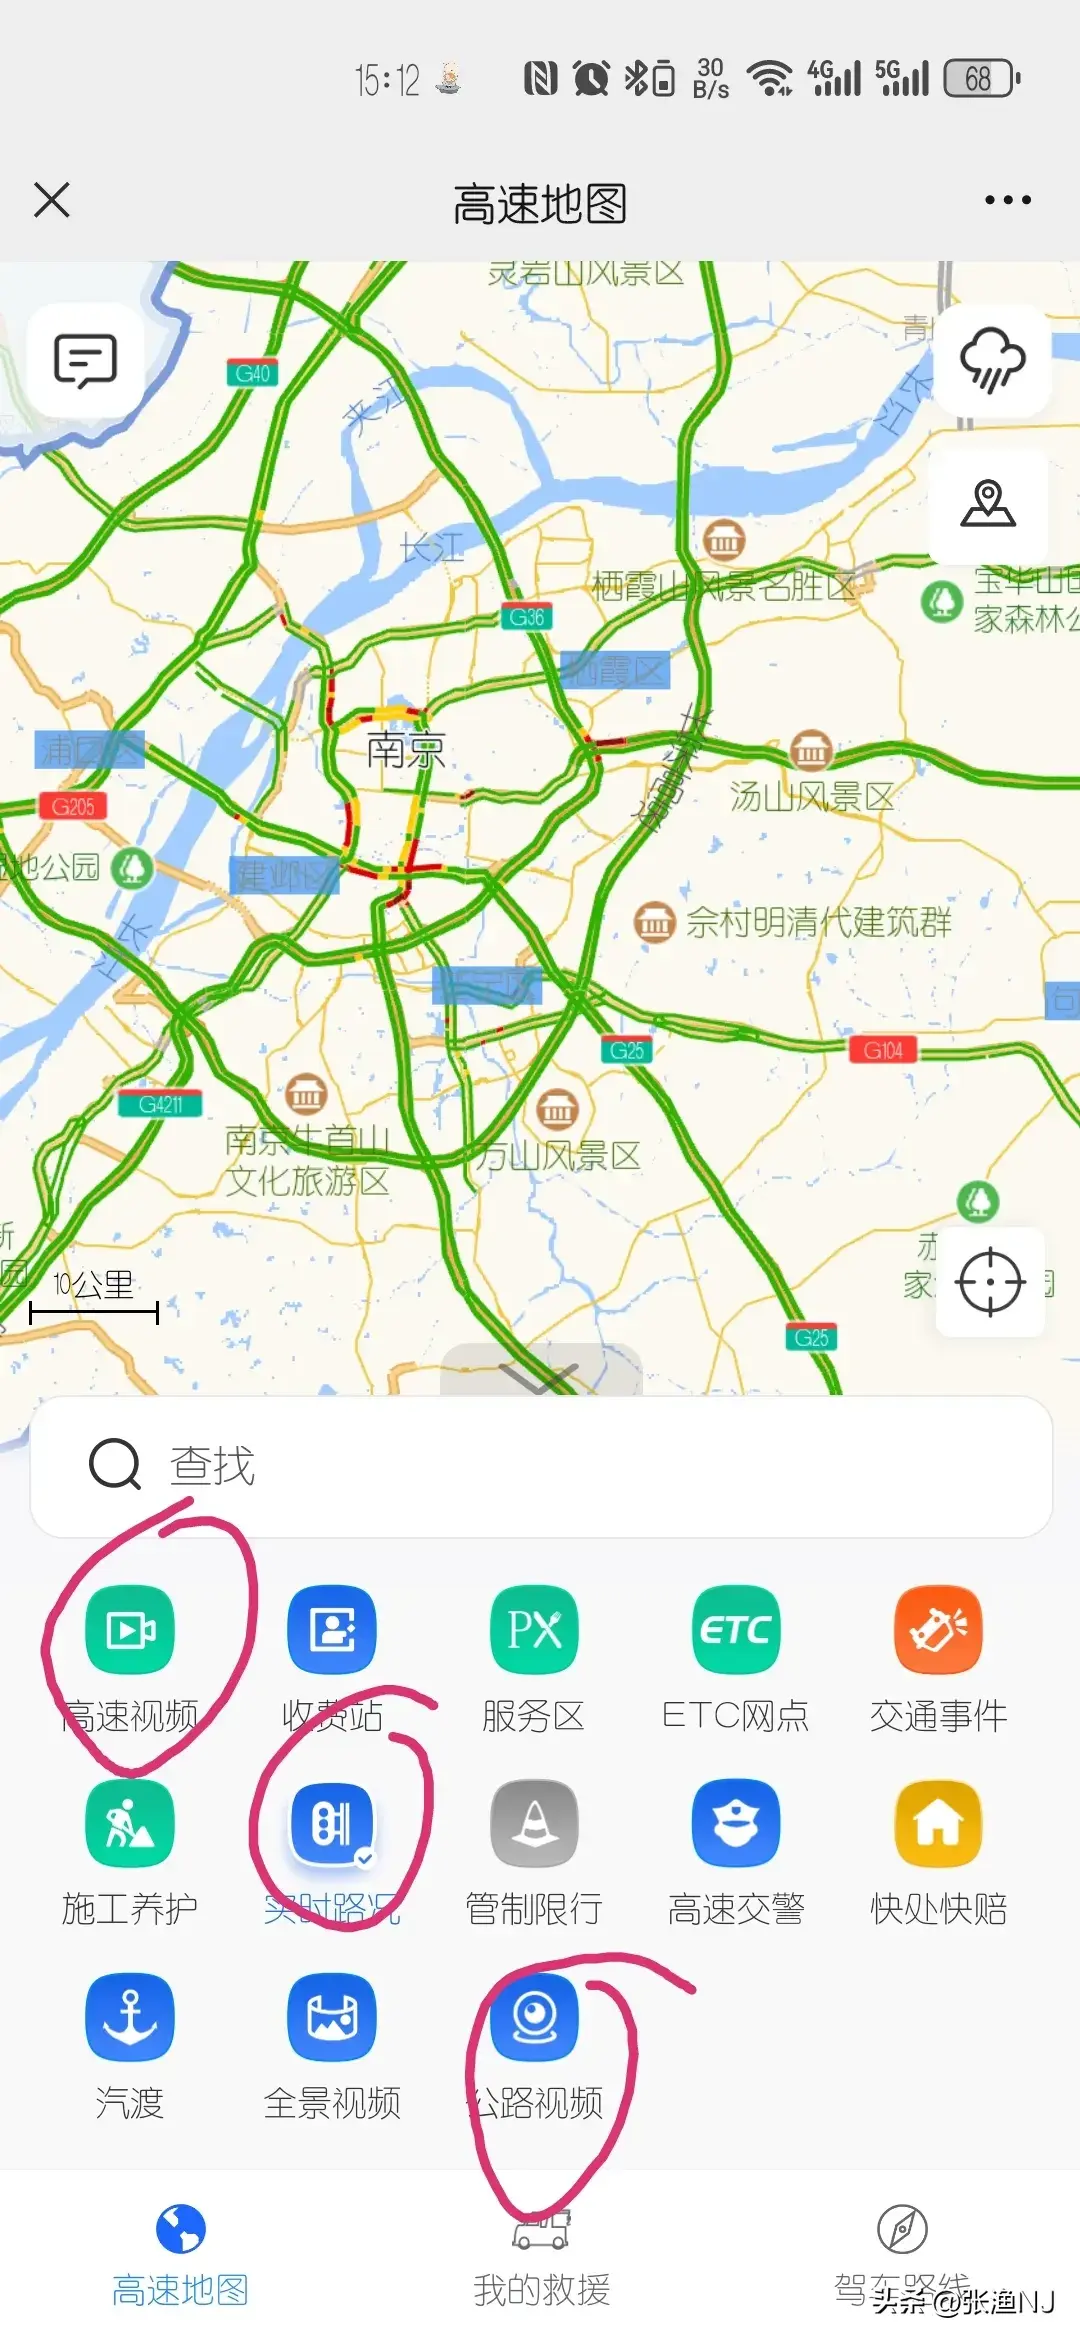 Connect Your Phone to Highway Surveillance Cameras to Monitor Traffic in Real Time